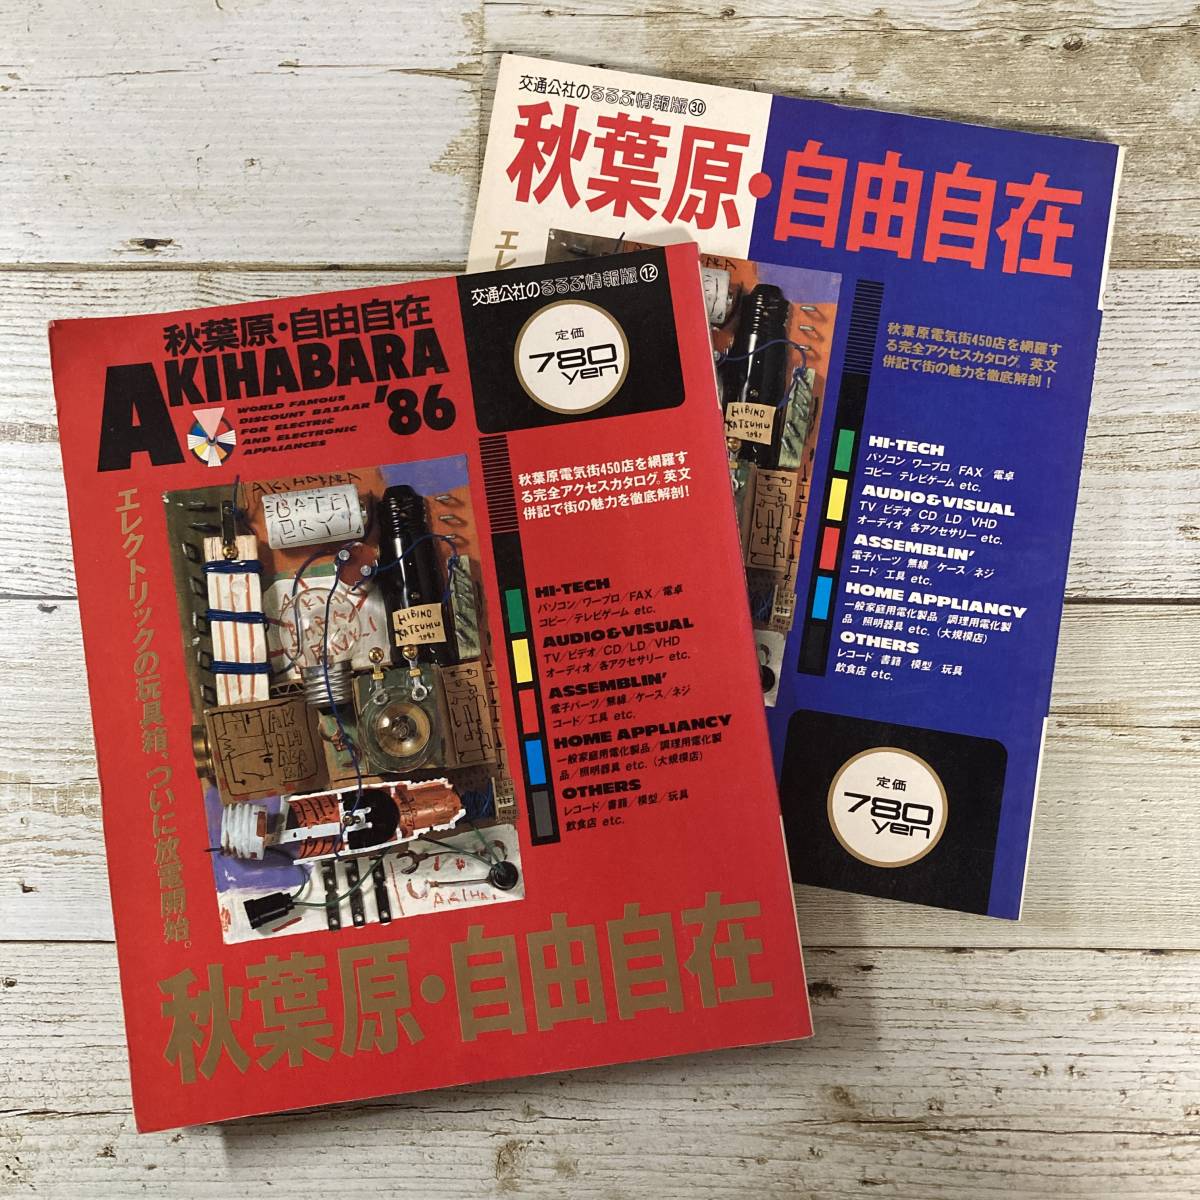 Ag0113 ■　秋葉原・自由自在　２冊セット ■ 1986年版 るるぶ情報版12 / 1987、88年版 るるぶ情報版30 ＊レトロ＊ジャンク【同梱不可】